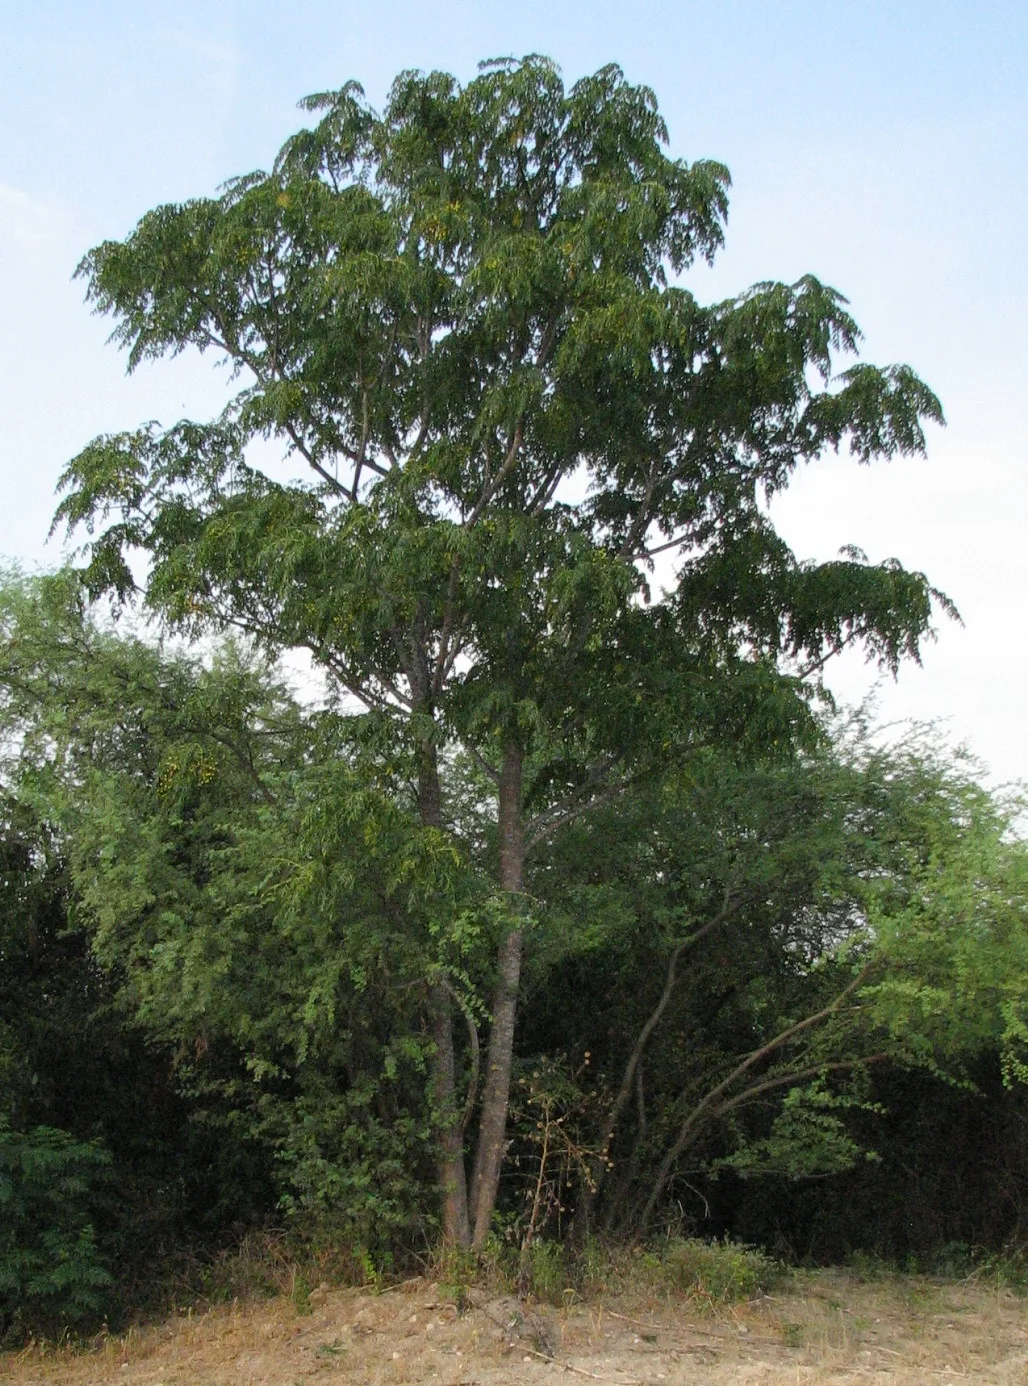 tall Chinaberry tree with smaller plants growing underneath it